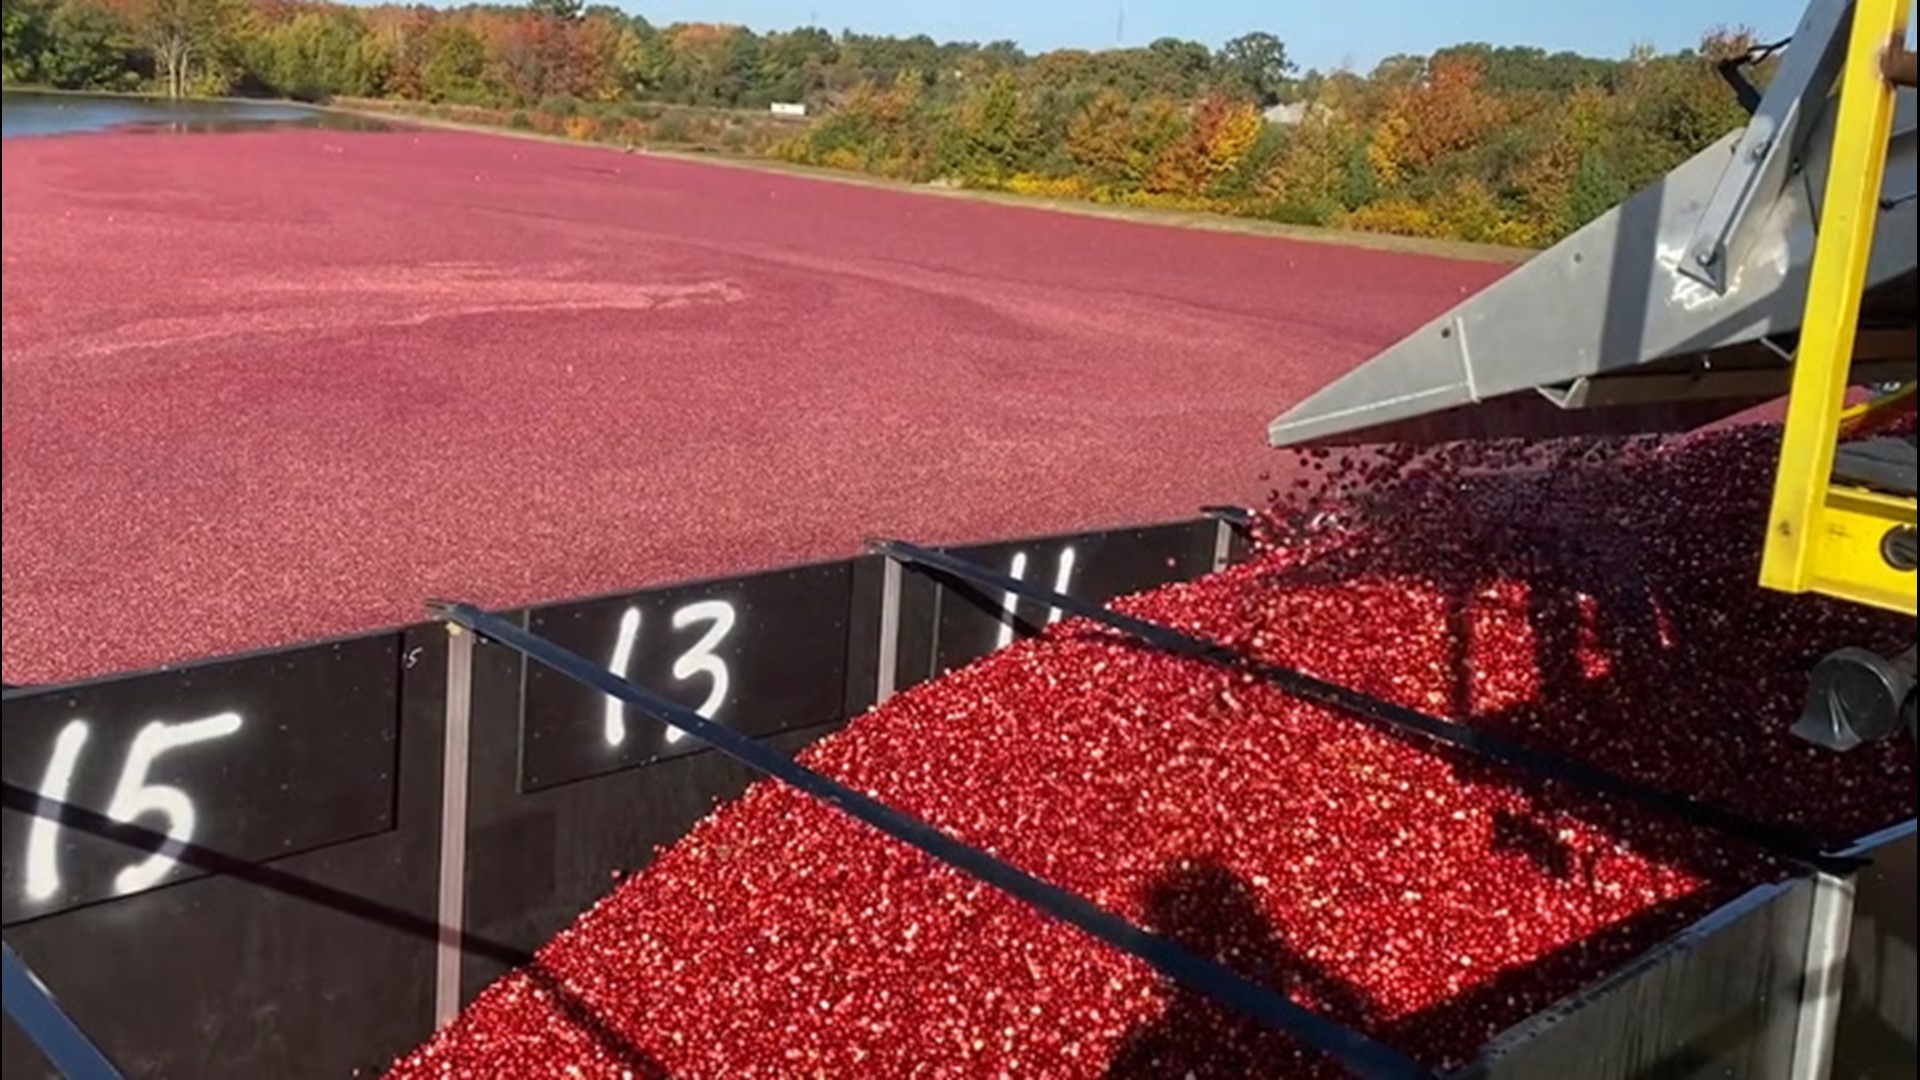 Some farmers say a late frost, extreme heat, lack of rain and hail made it tough to get cranberries to the Thanksgiving Day table this year.